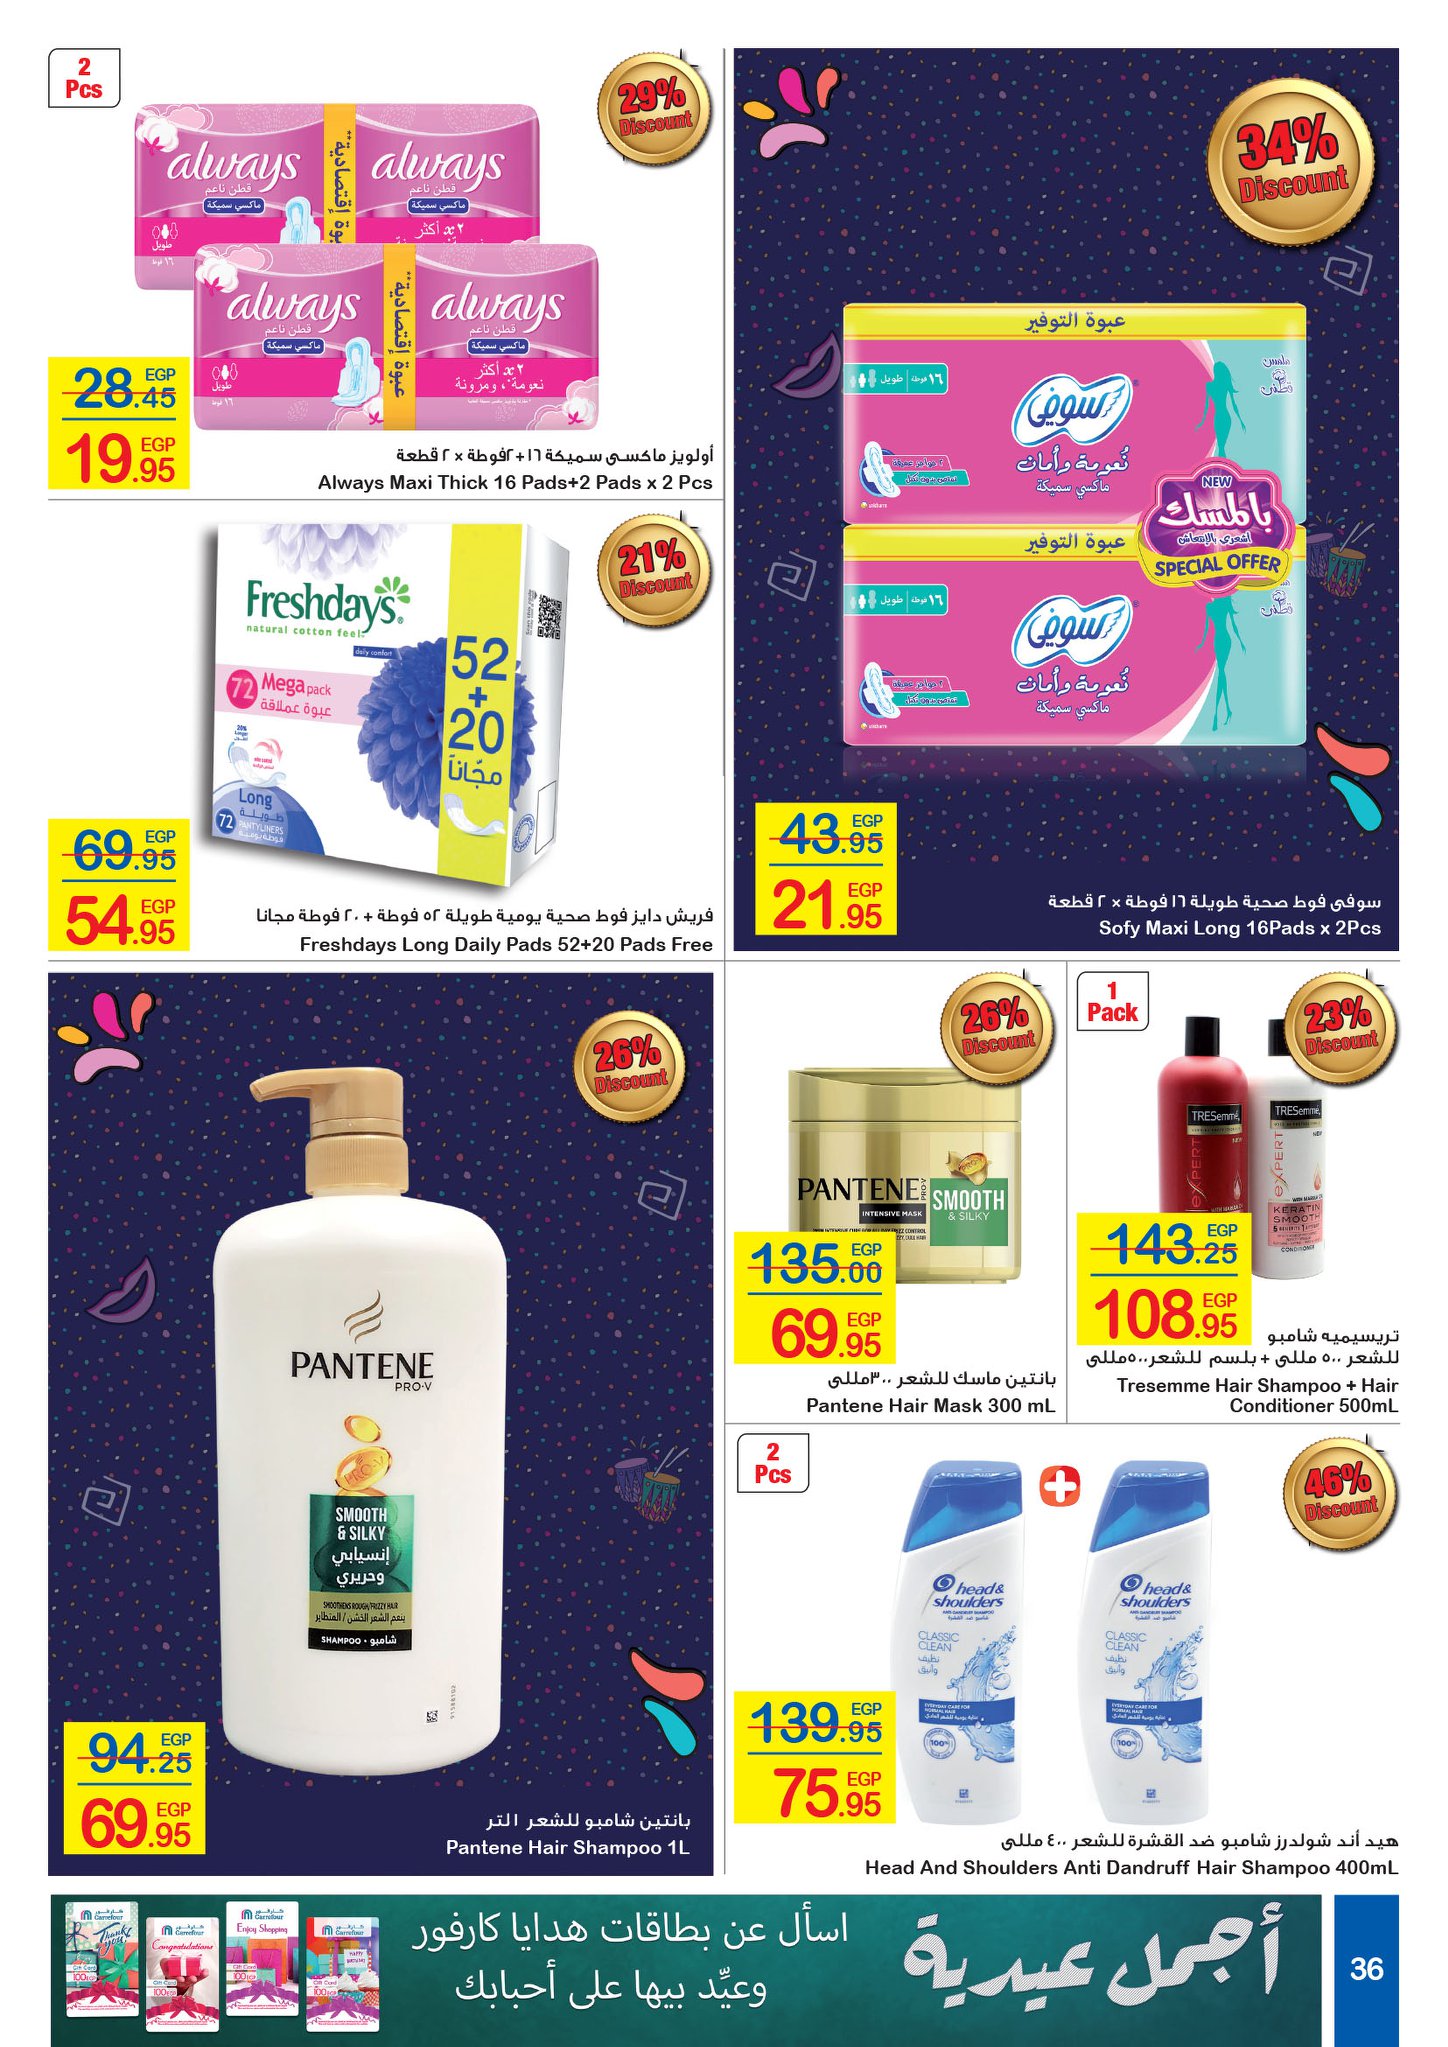 Carrefour Flyer from 16/7 till 27/7 | Carrefour Egypt 35